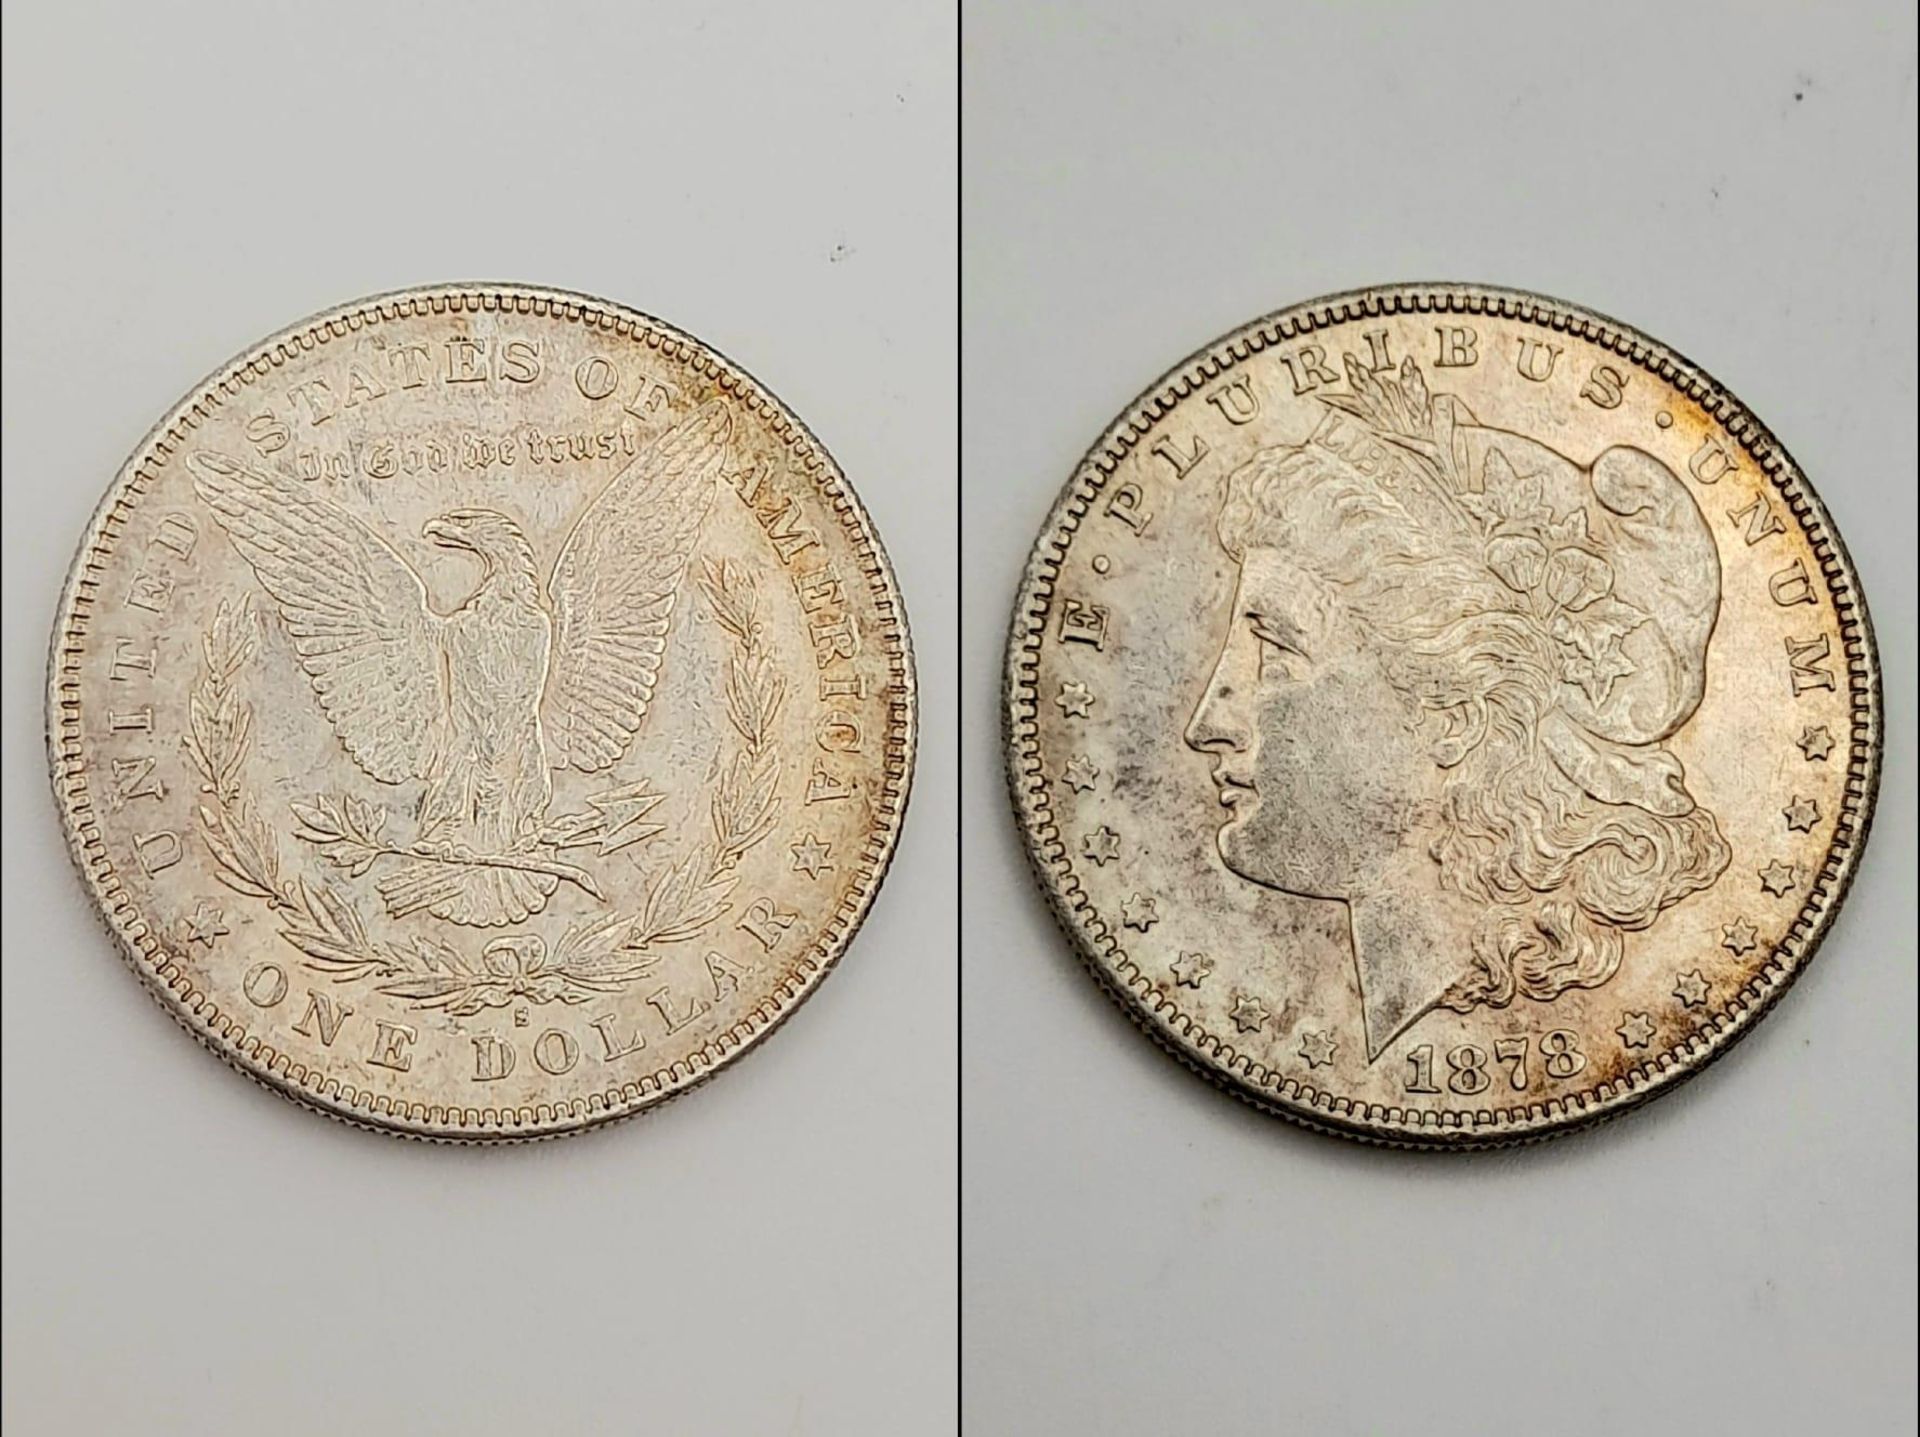 An 1878 (First Year of Issue) Morgan Dollar (San Francisco Mint) About Uncirculated Condition (